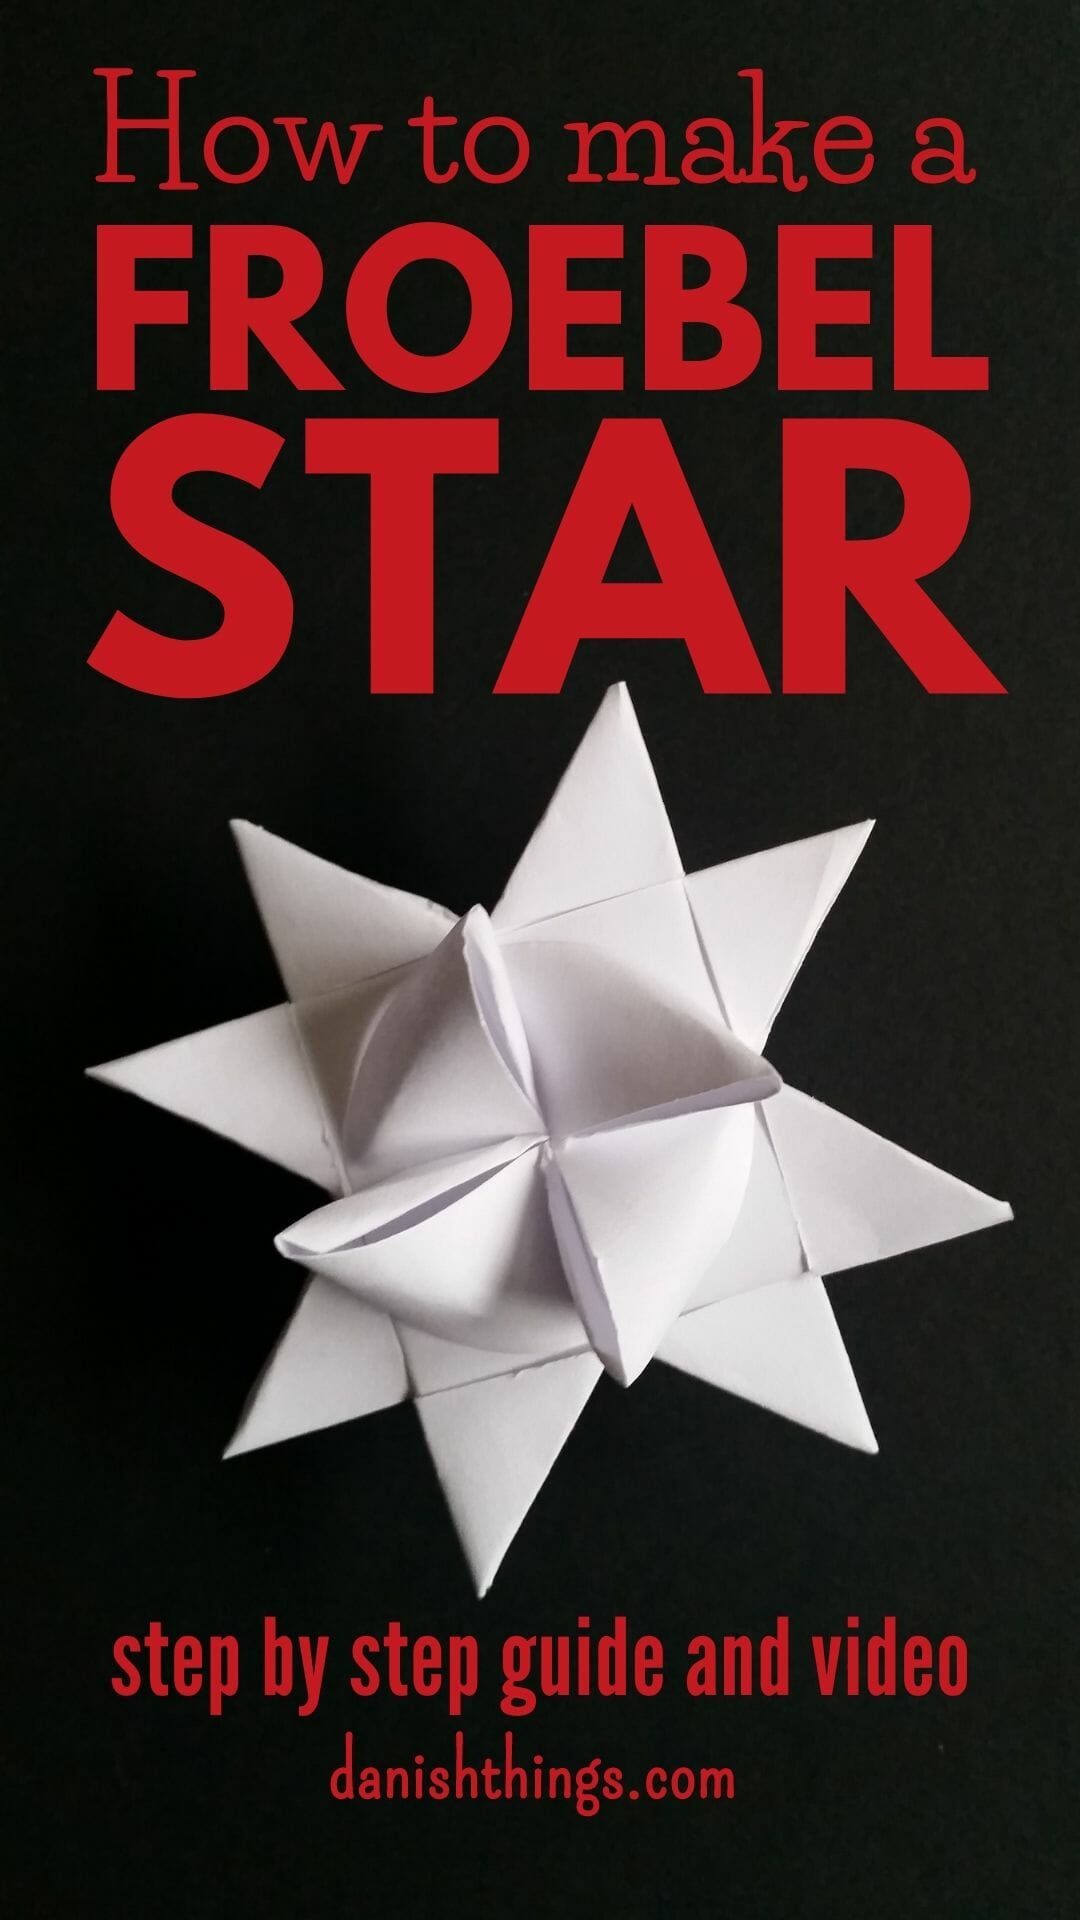 How to make a Froebel star - a classic Danish Christmas decoration. A Christmas star - step-by-step guide. Whether you weave or fold paper stars, if you are a beginner or experienced, you will get help with text, photos, and videos for every step. Find recipes, step-by-step guides, free print, and inspiration for this time of year at danishthings.com © Christel Parby - Danish Things #DanishThings #froebelstar #frobelstern #paperstar #paper #star #howto #howtoguide #danish #christmas #decoration #homemade #decoration #danishchristmas #danishstar #adventstar #advent #nordic #german #christmasstar 